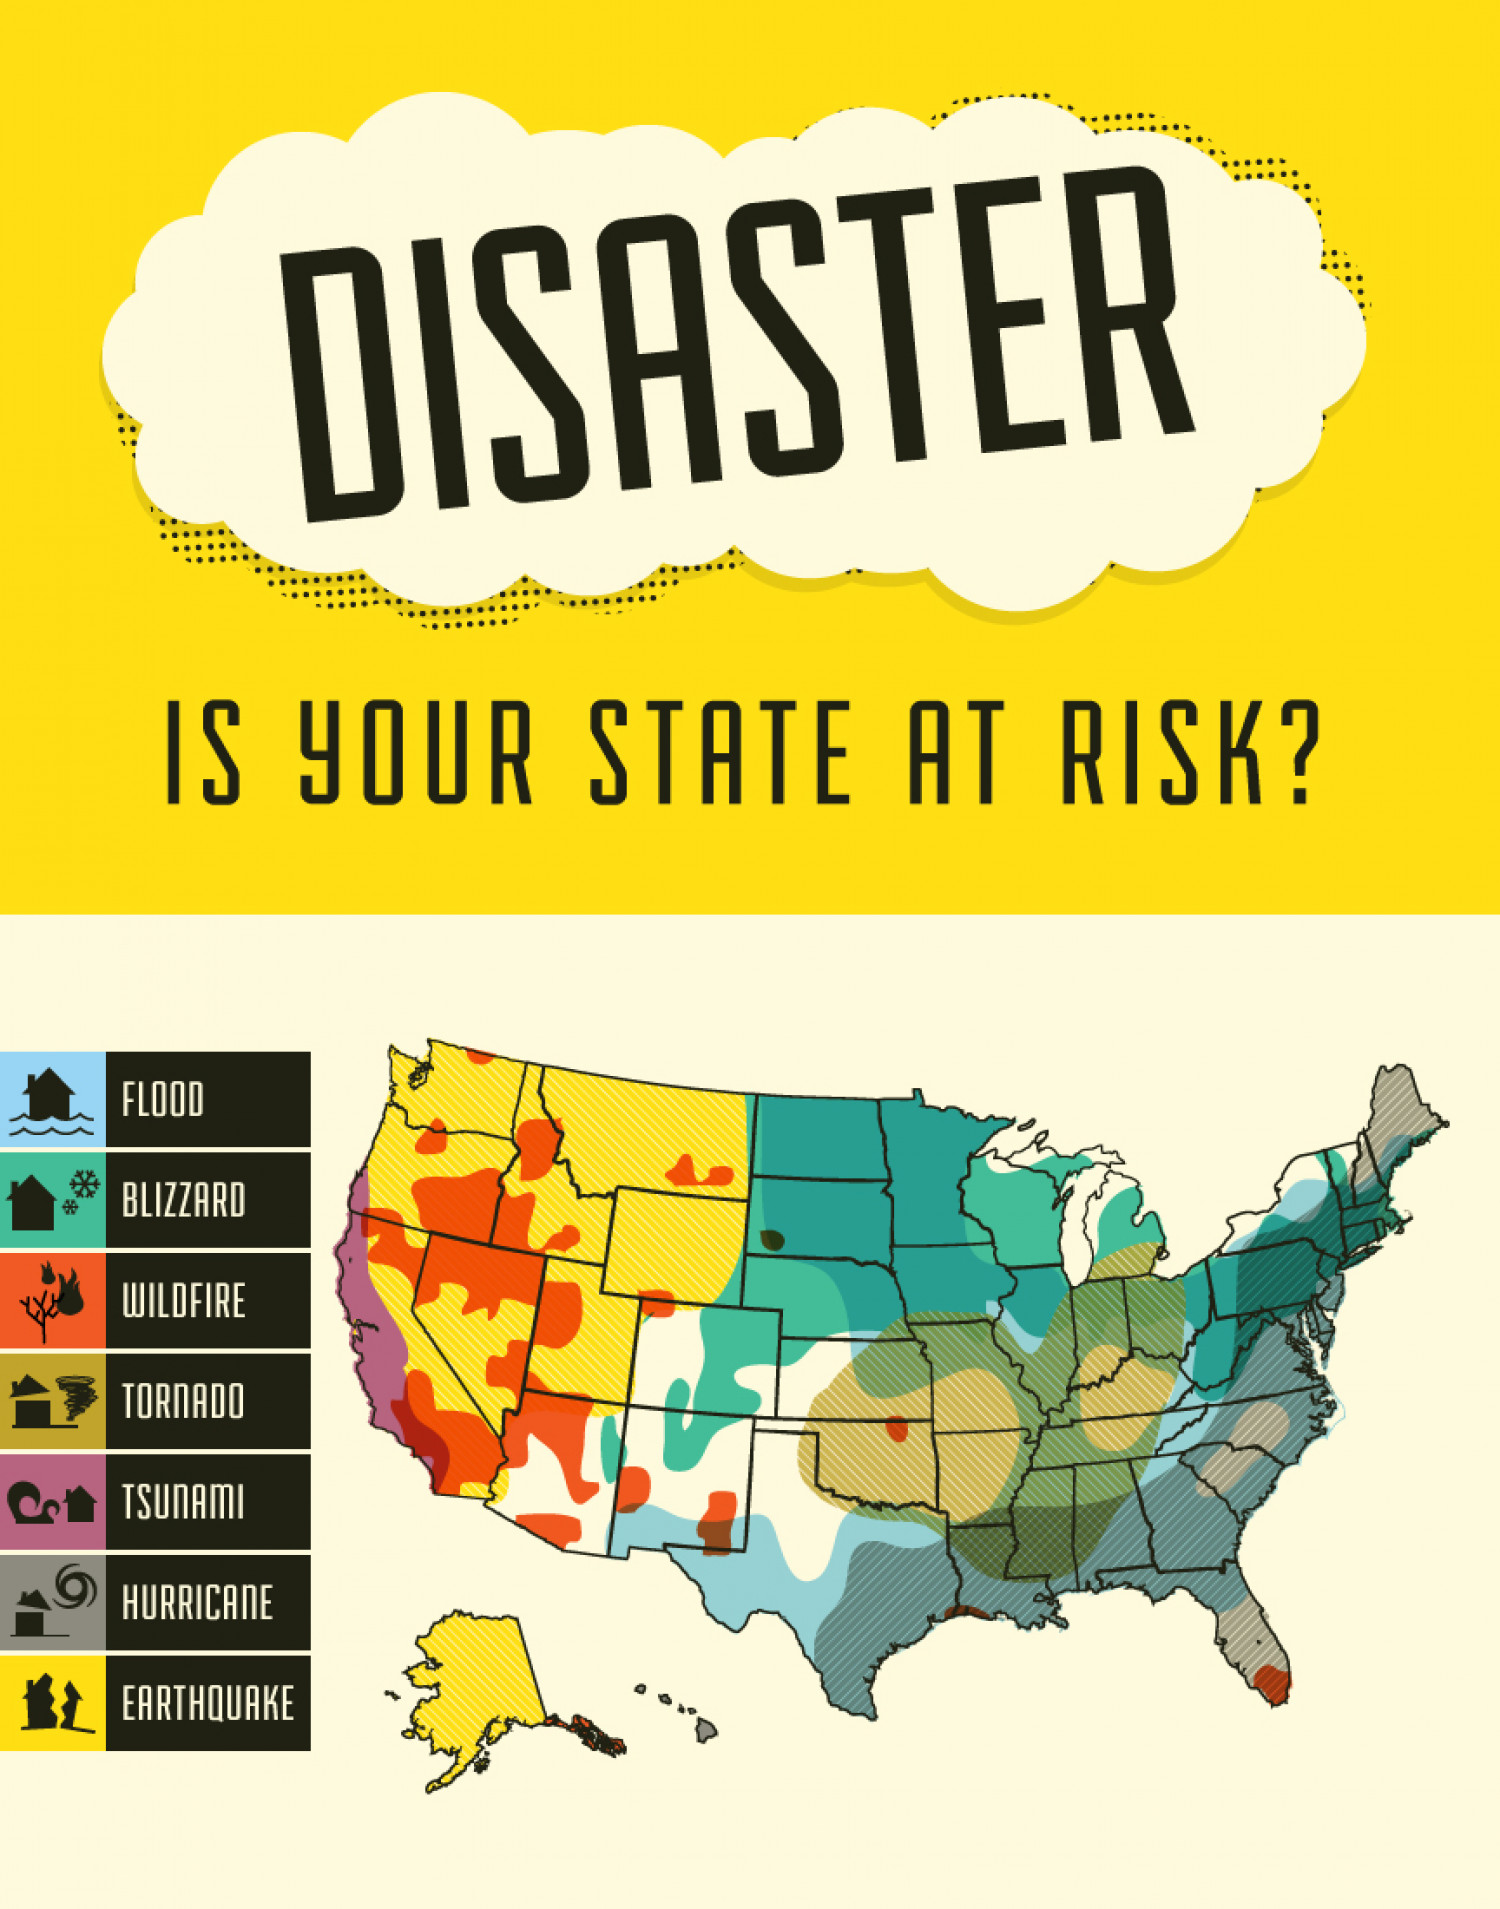 Disaster: Is your state at risk? Infographic